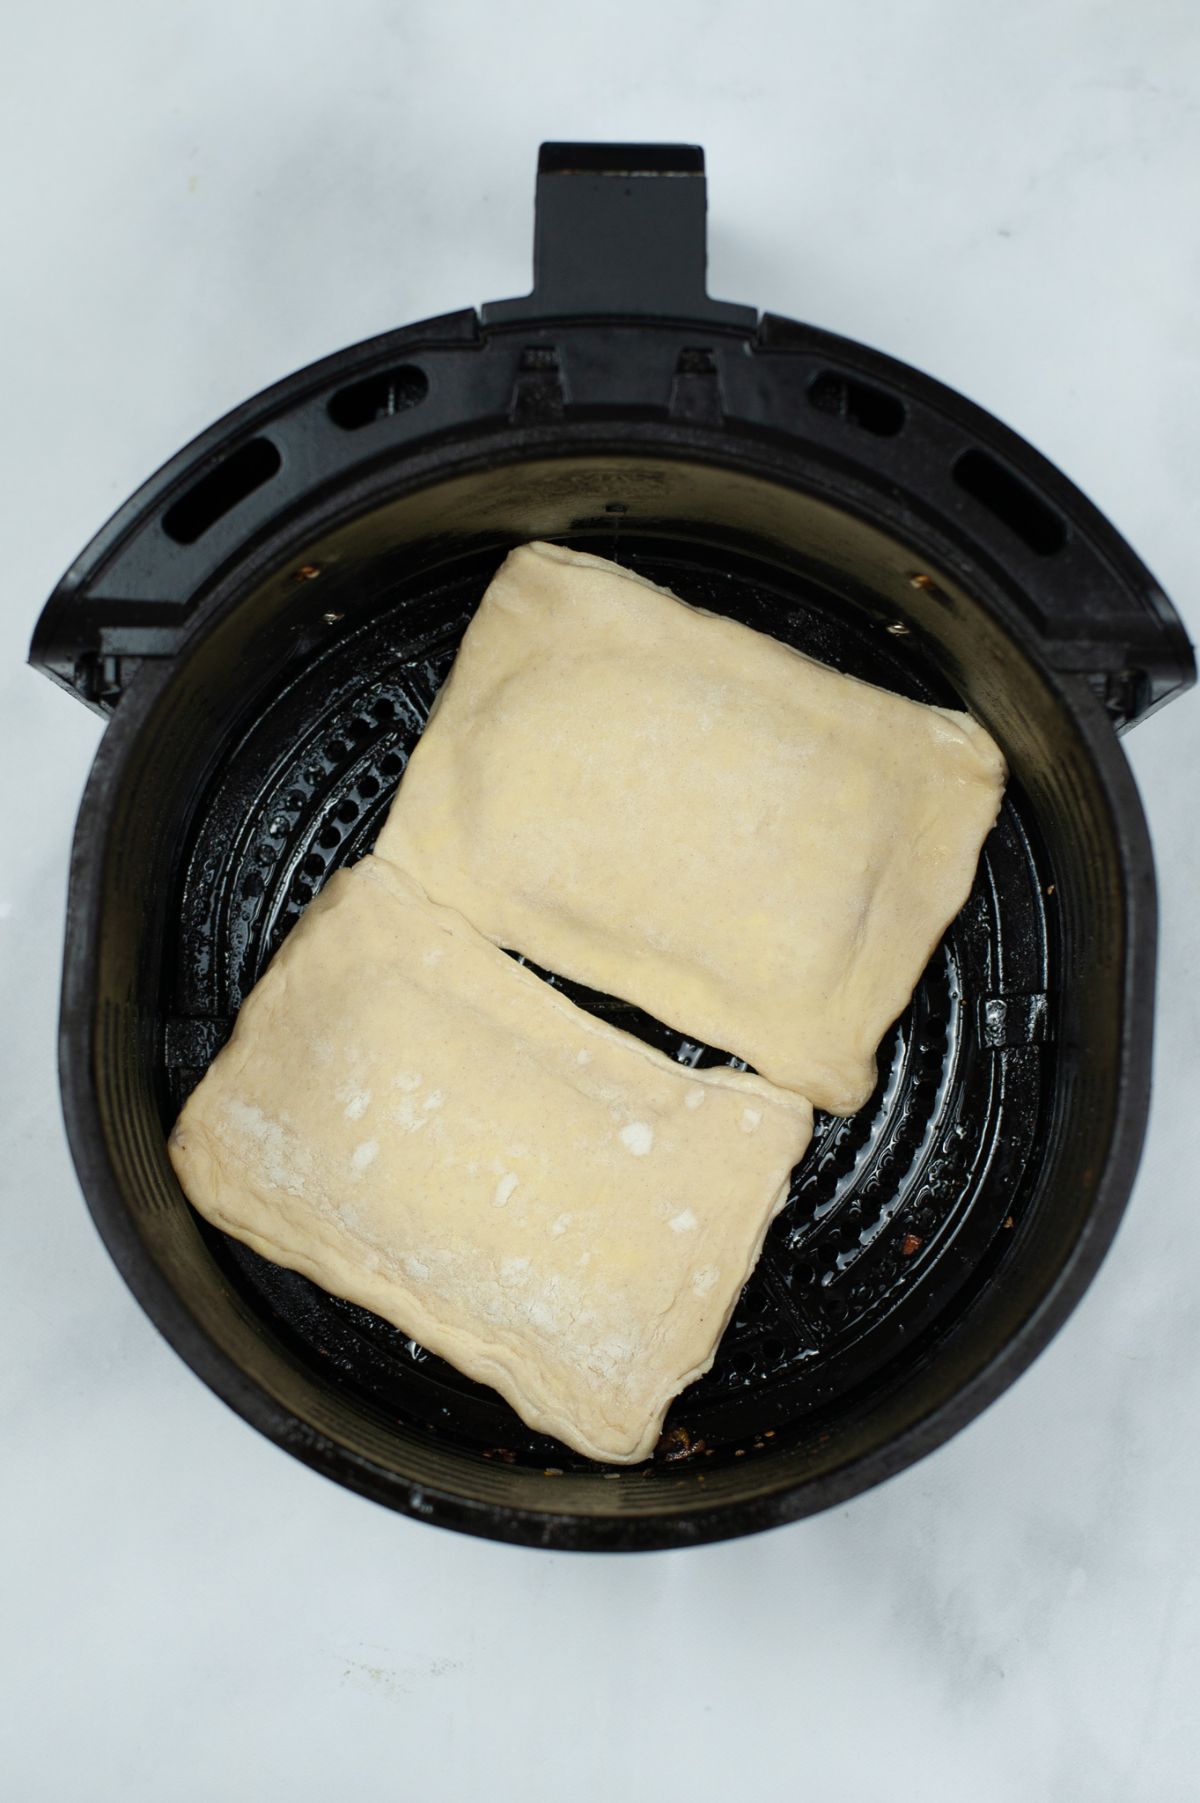 Two assembled puff pastry with jam filling placed in an air fryer basket.